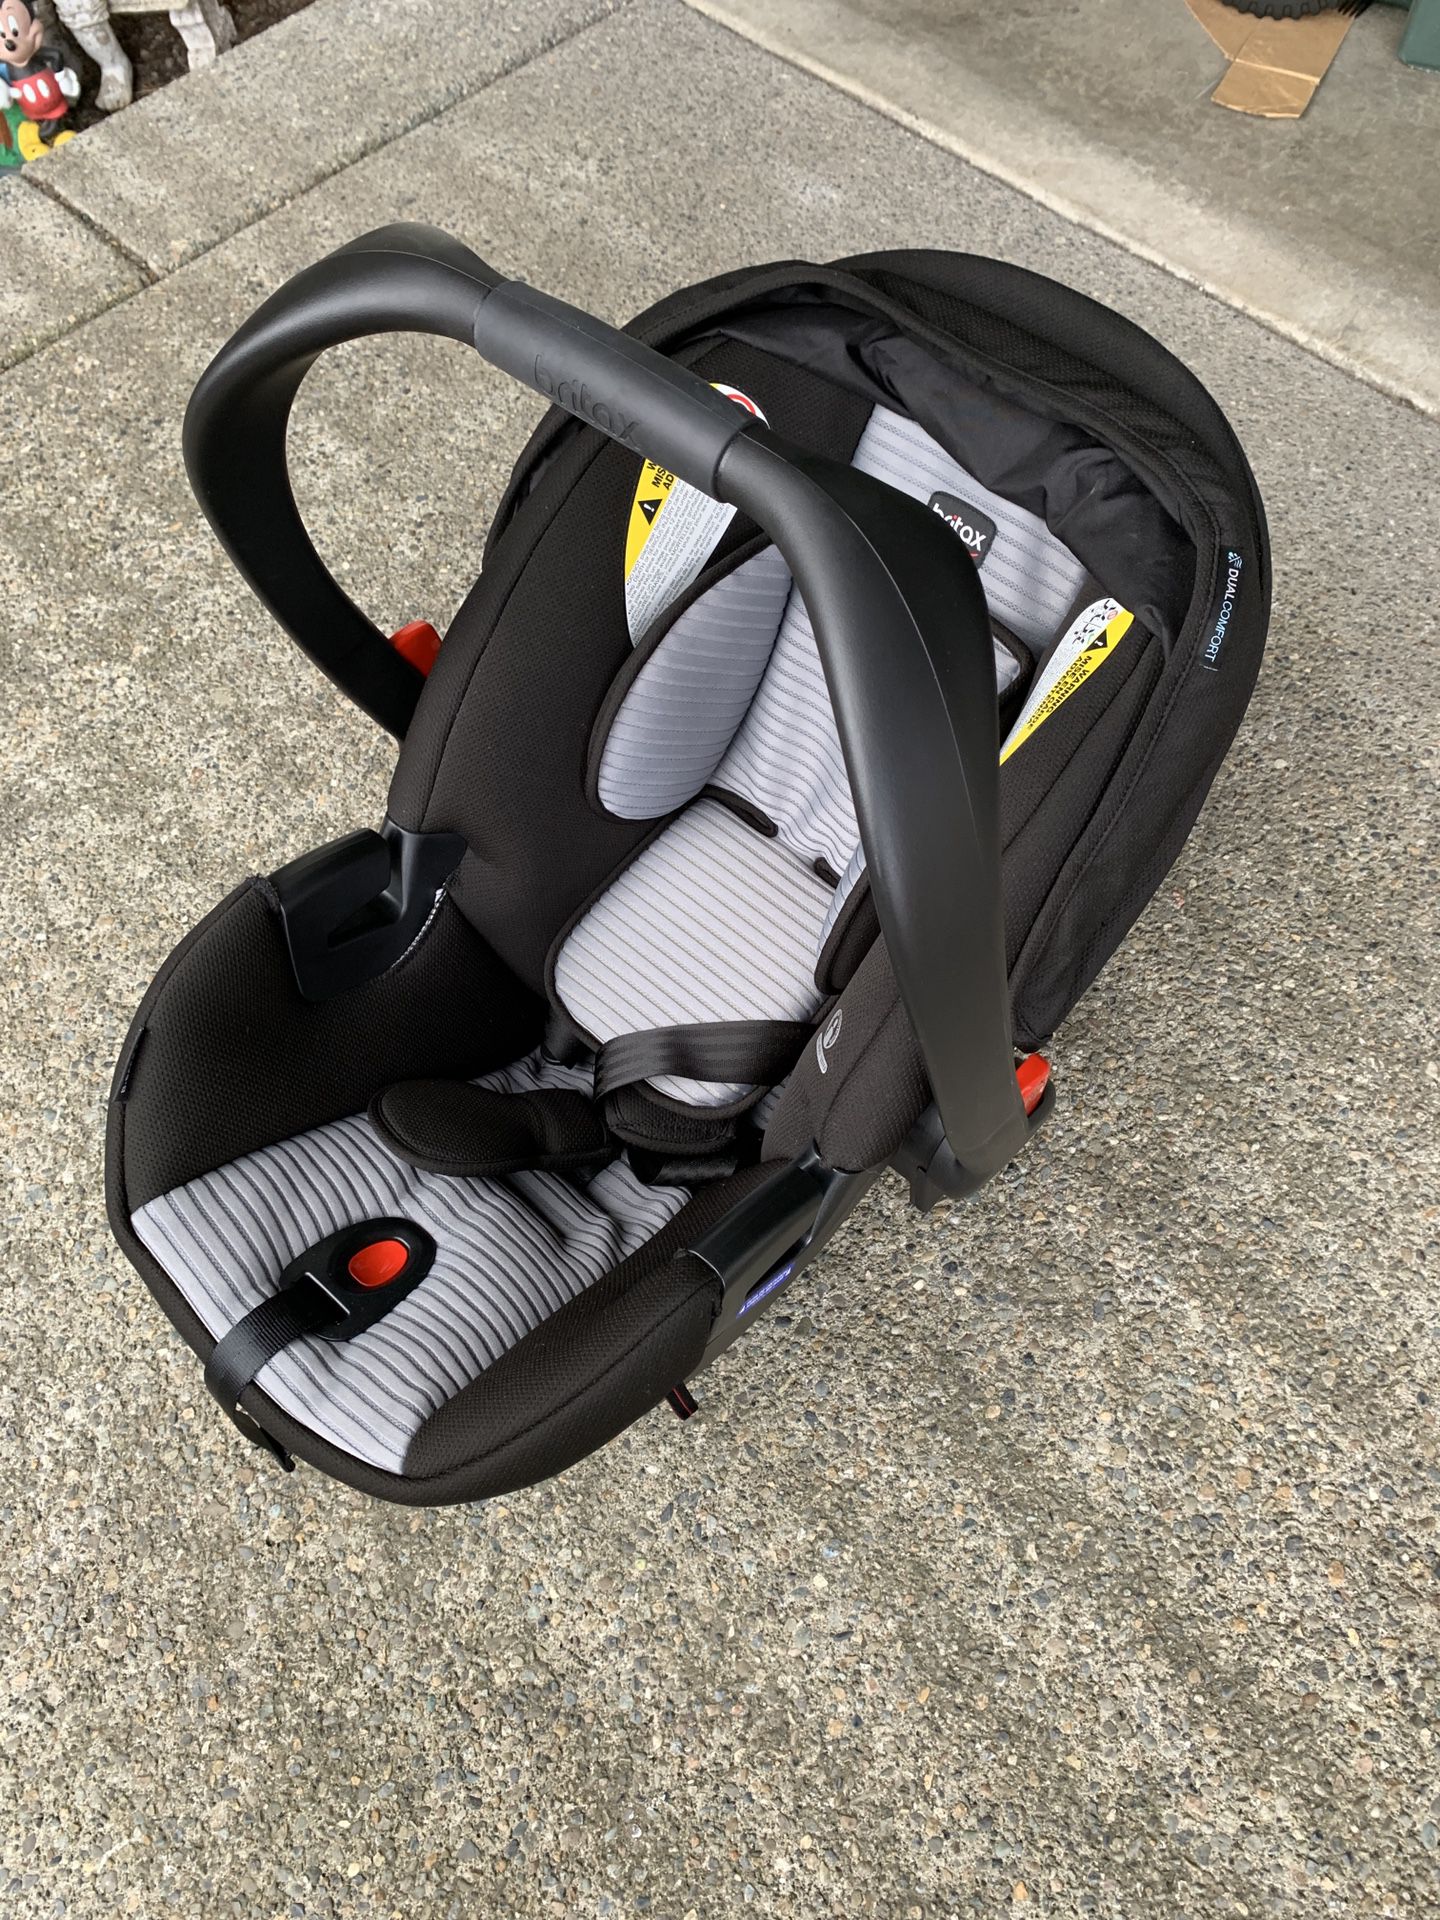 Britax infant car seat $20*clean and great condition* sold the other car so we dont need anymore